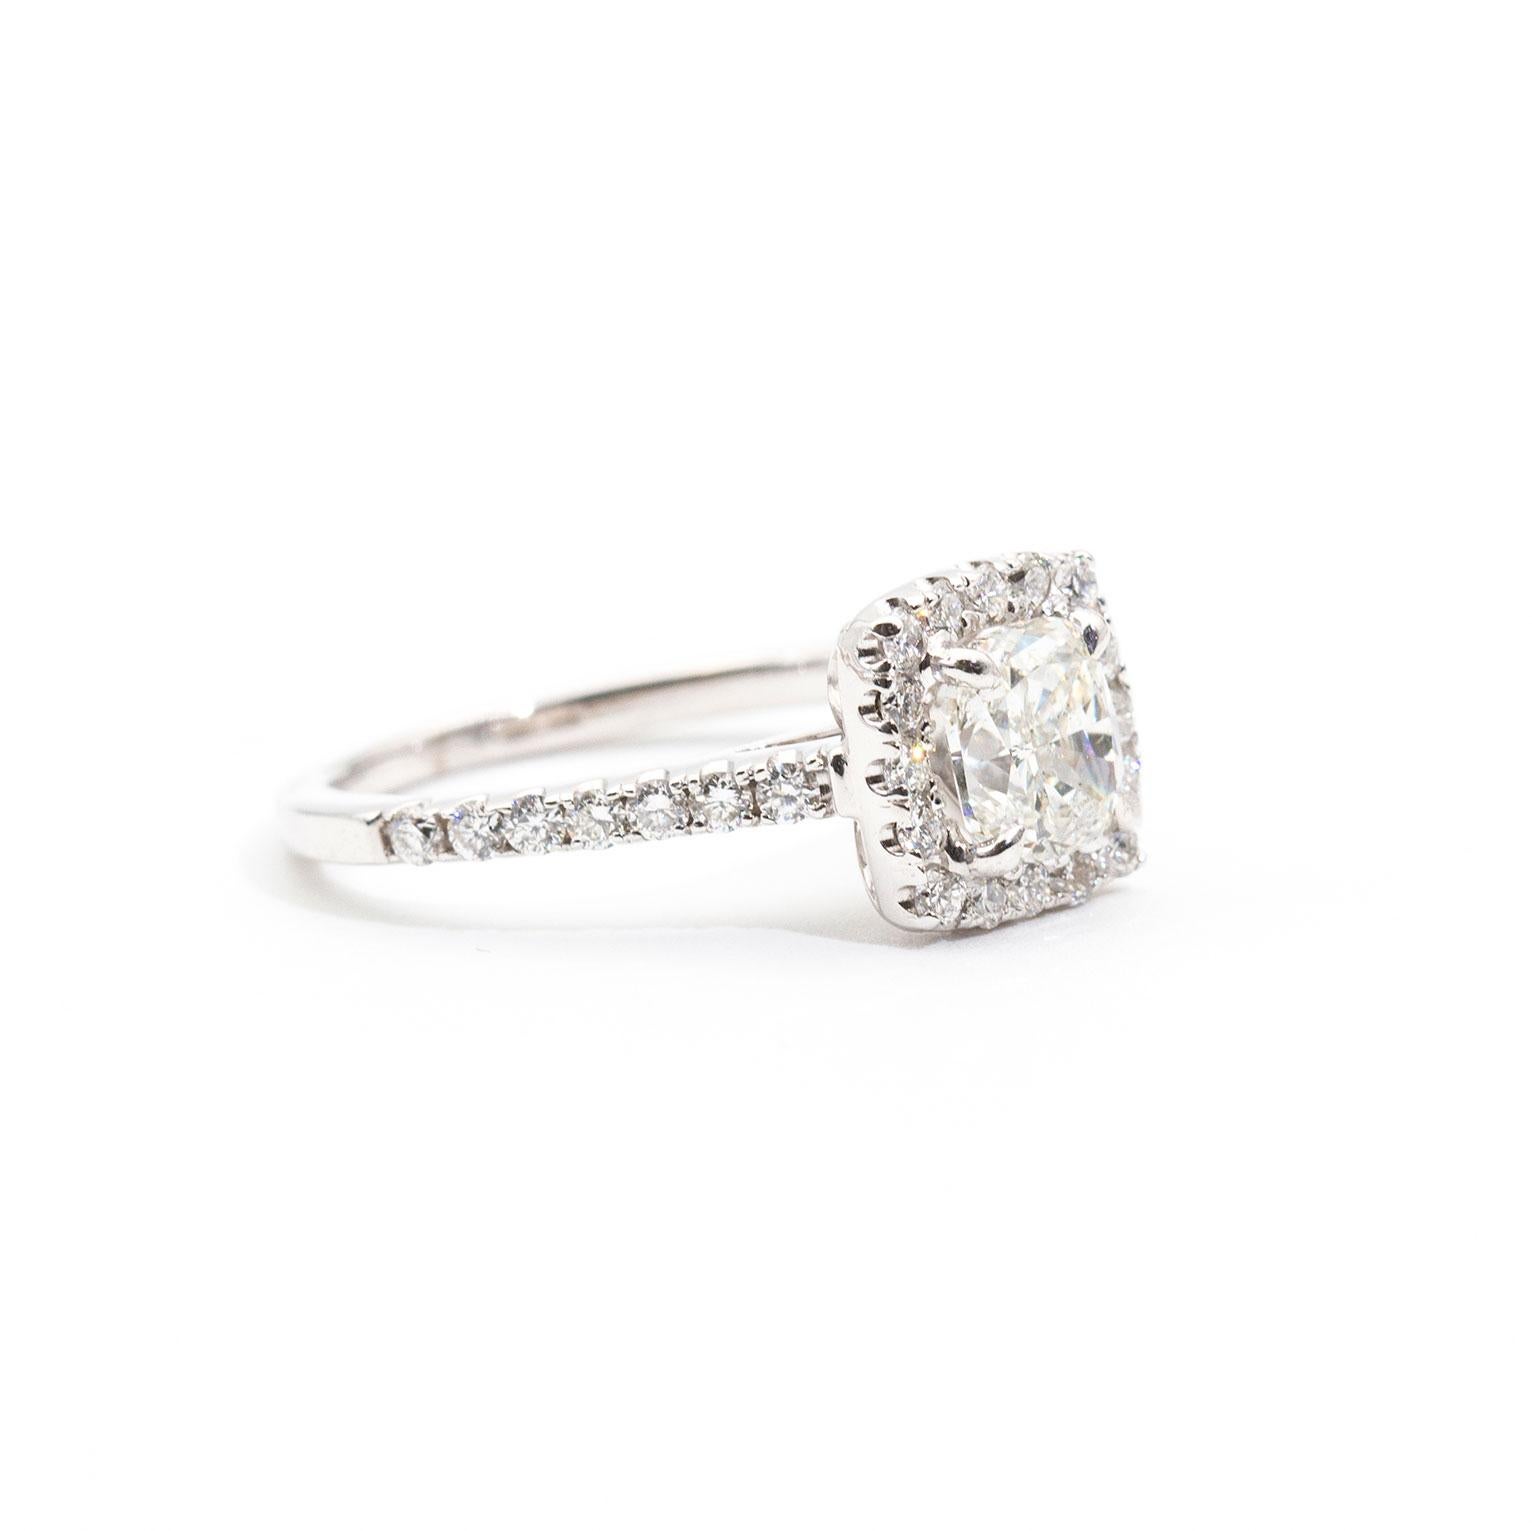 This opulent halo style engagement ring is forged in 18 carat white gold and features a magnificent 1.01 carat cushion modified brilliant cut diamond certified by the Gemological Association of America, GIA. This ring is encrusted with 0.45 carats